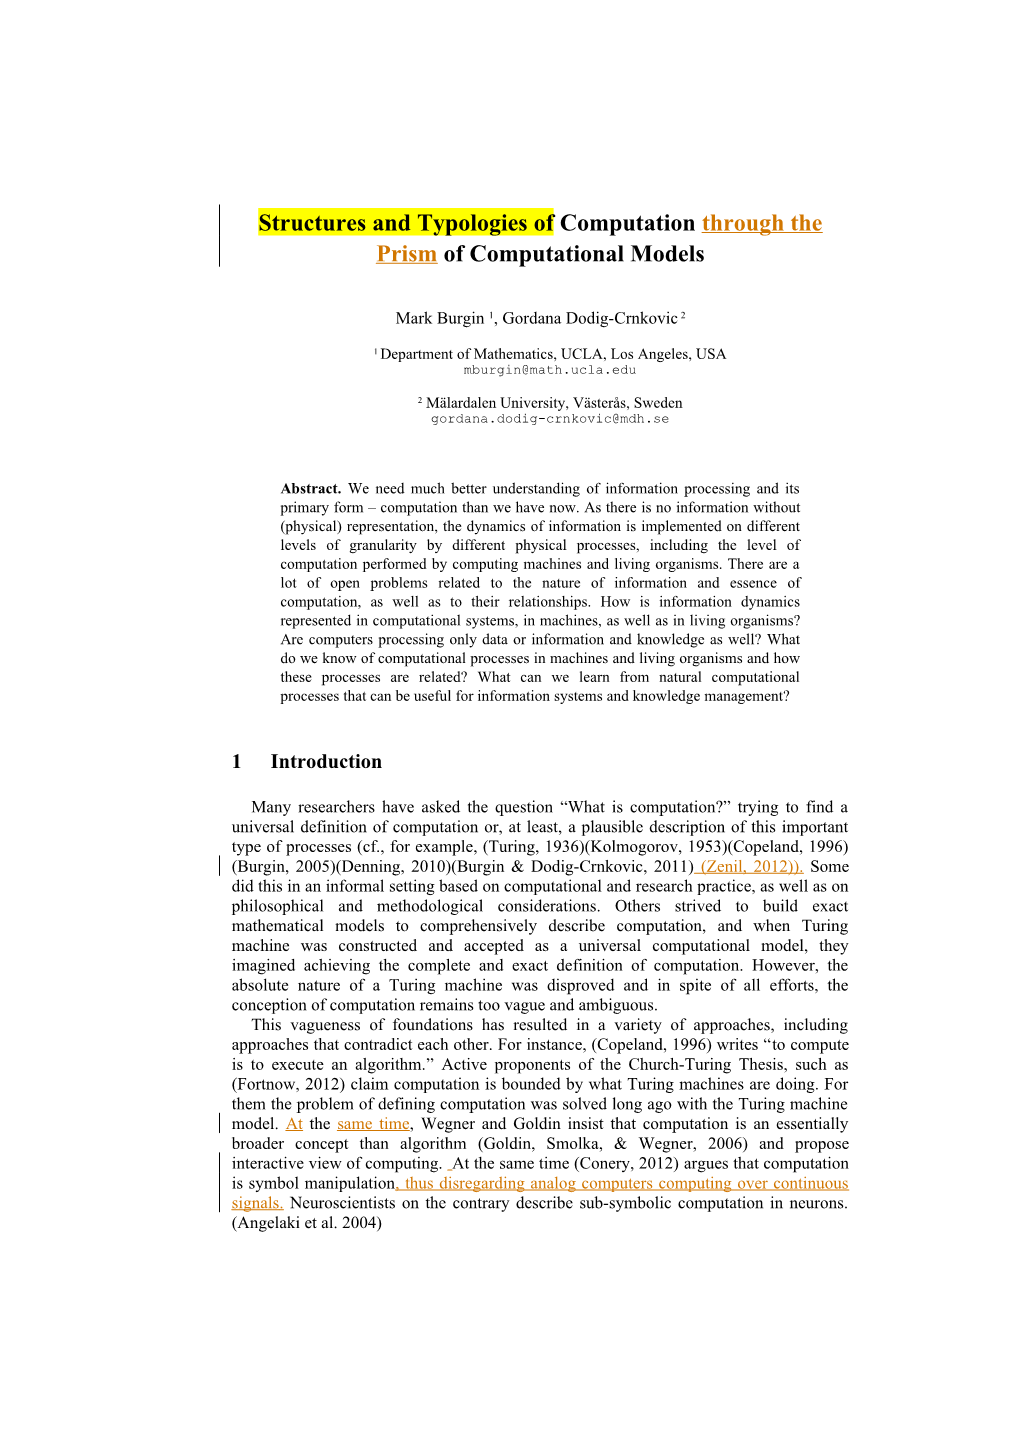 Structures and Typologies of Computation Through the Prism of Computational Models